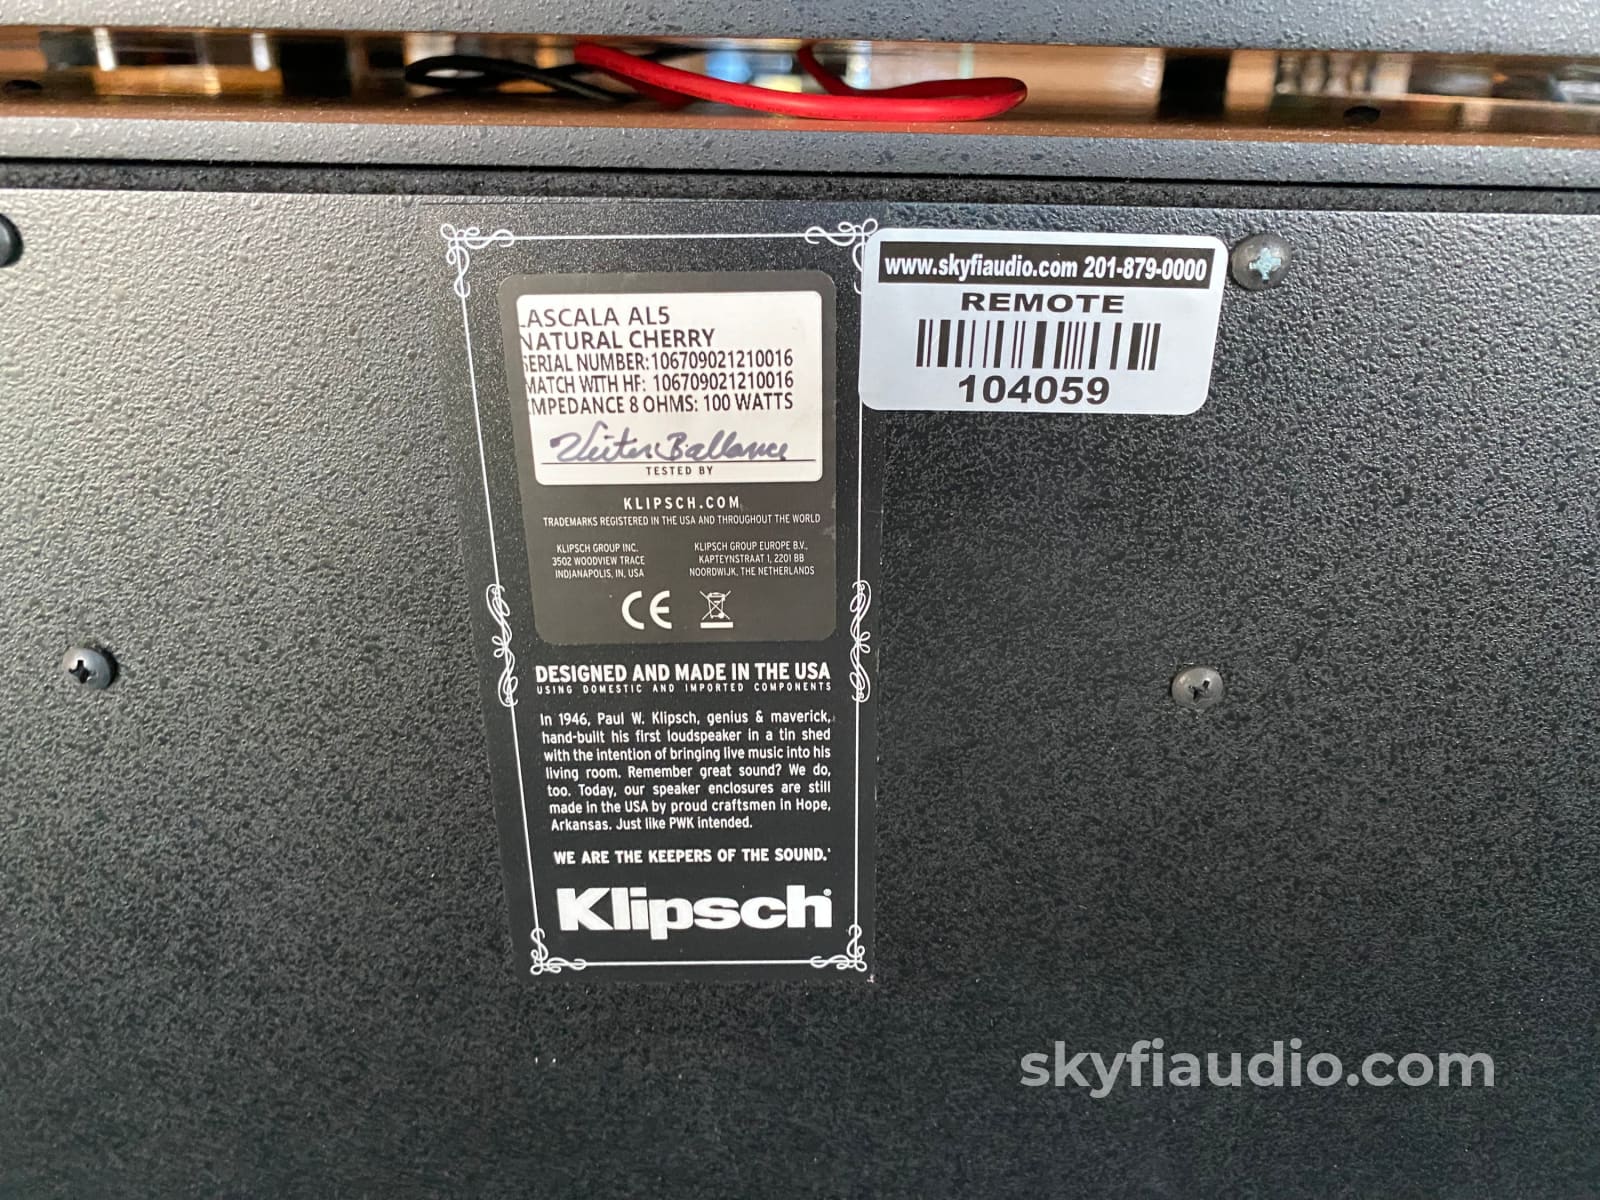 Klipsch Lascala Al5 Speakers. Stereophile Class A - Used Call For Price Speakers